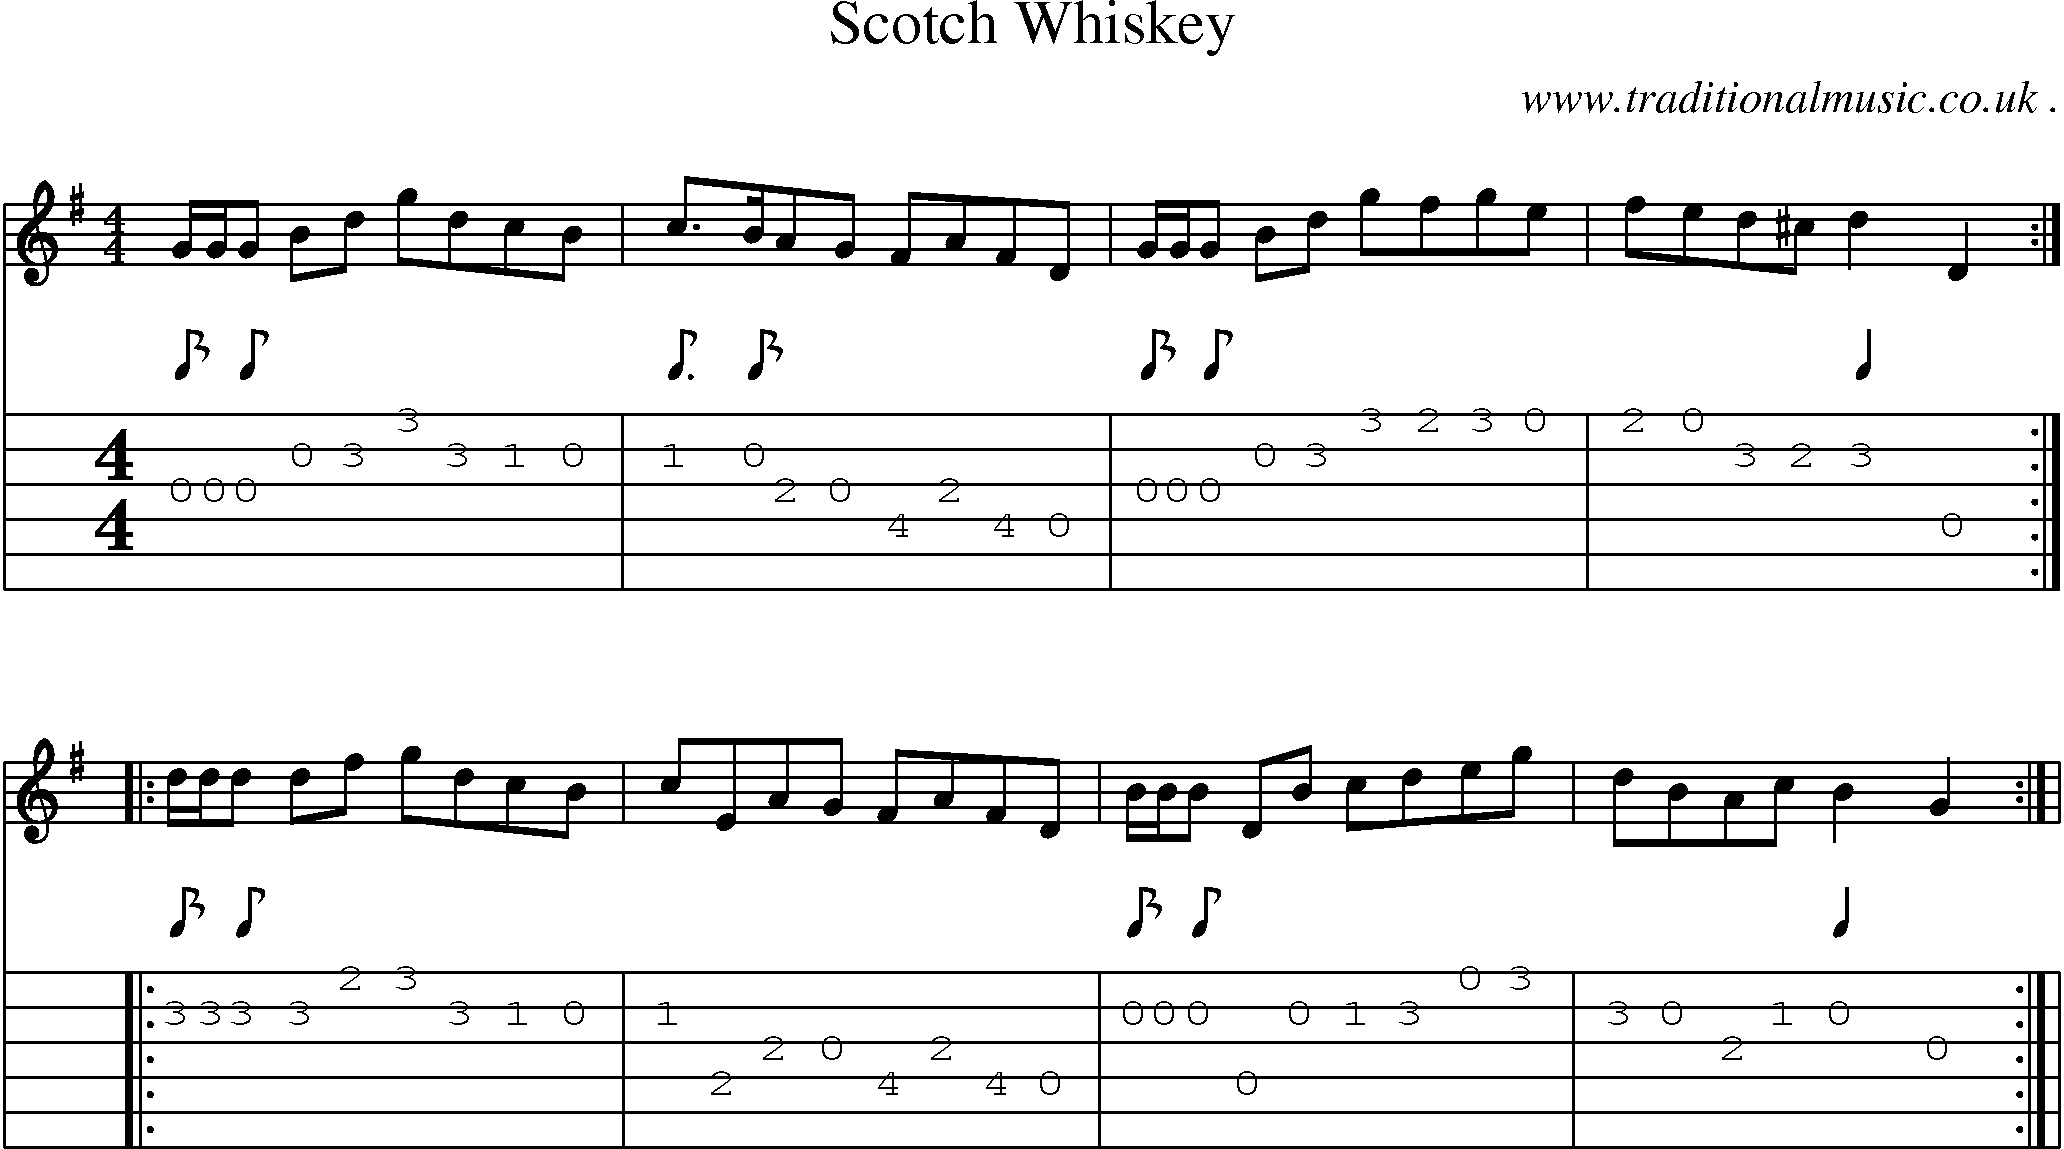 Sheet-Music and Guitar Tabs for Scotch Whiskey